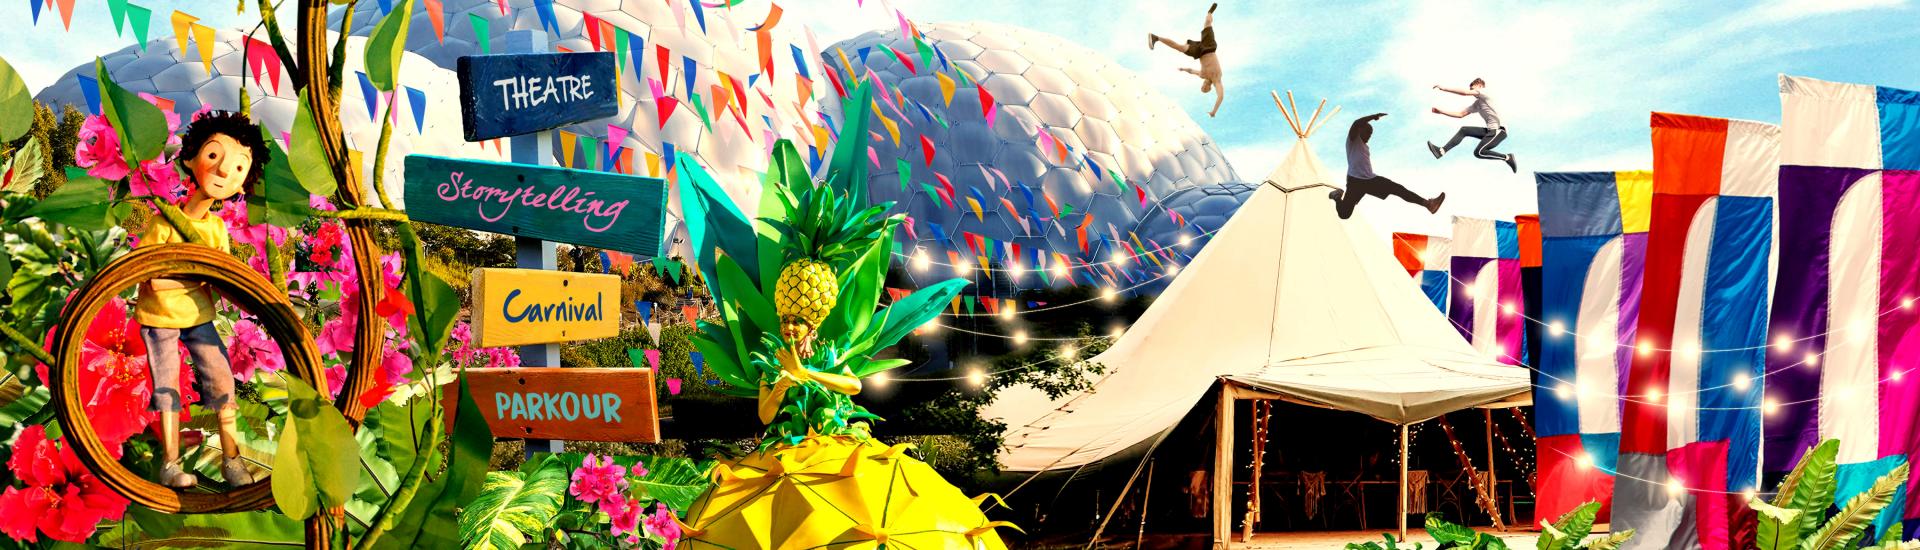 Eden Project with festival style flags, bunting and performers